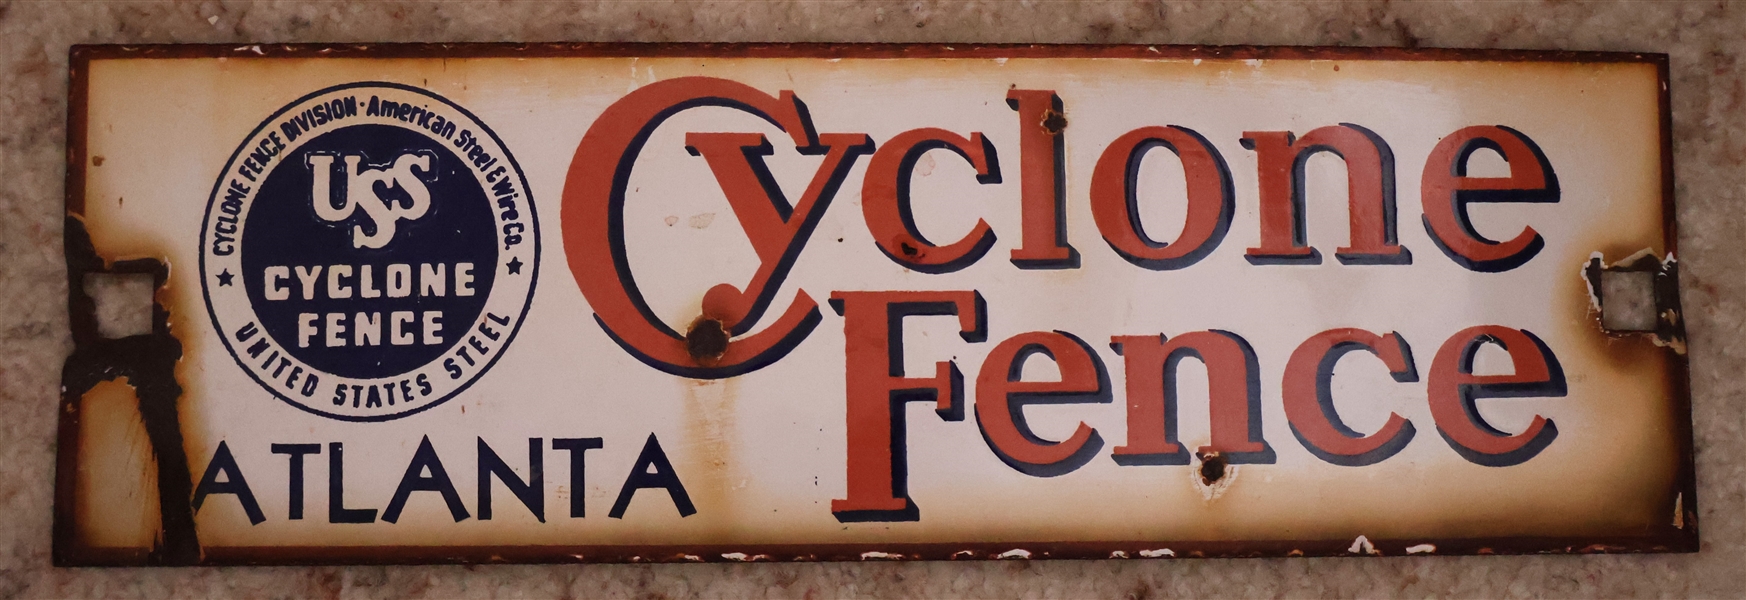 Porcelain Enamel "Cyclone Fence - Atlanta" Sign - USS Cyclone Fence - Measures 4 1/4" by 13 1/2"